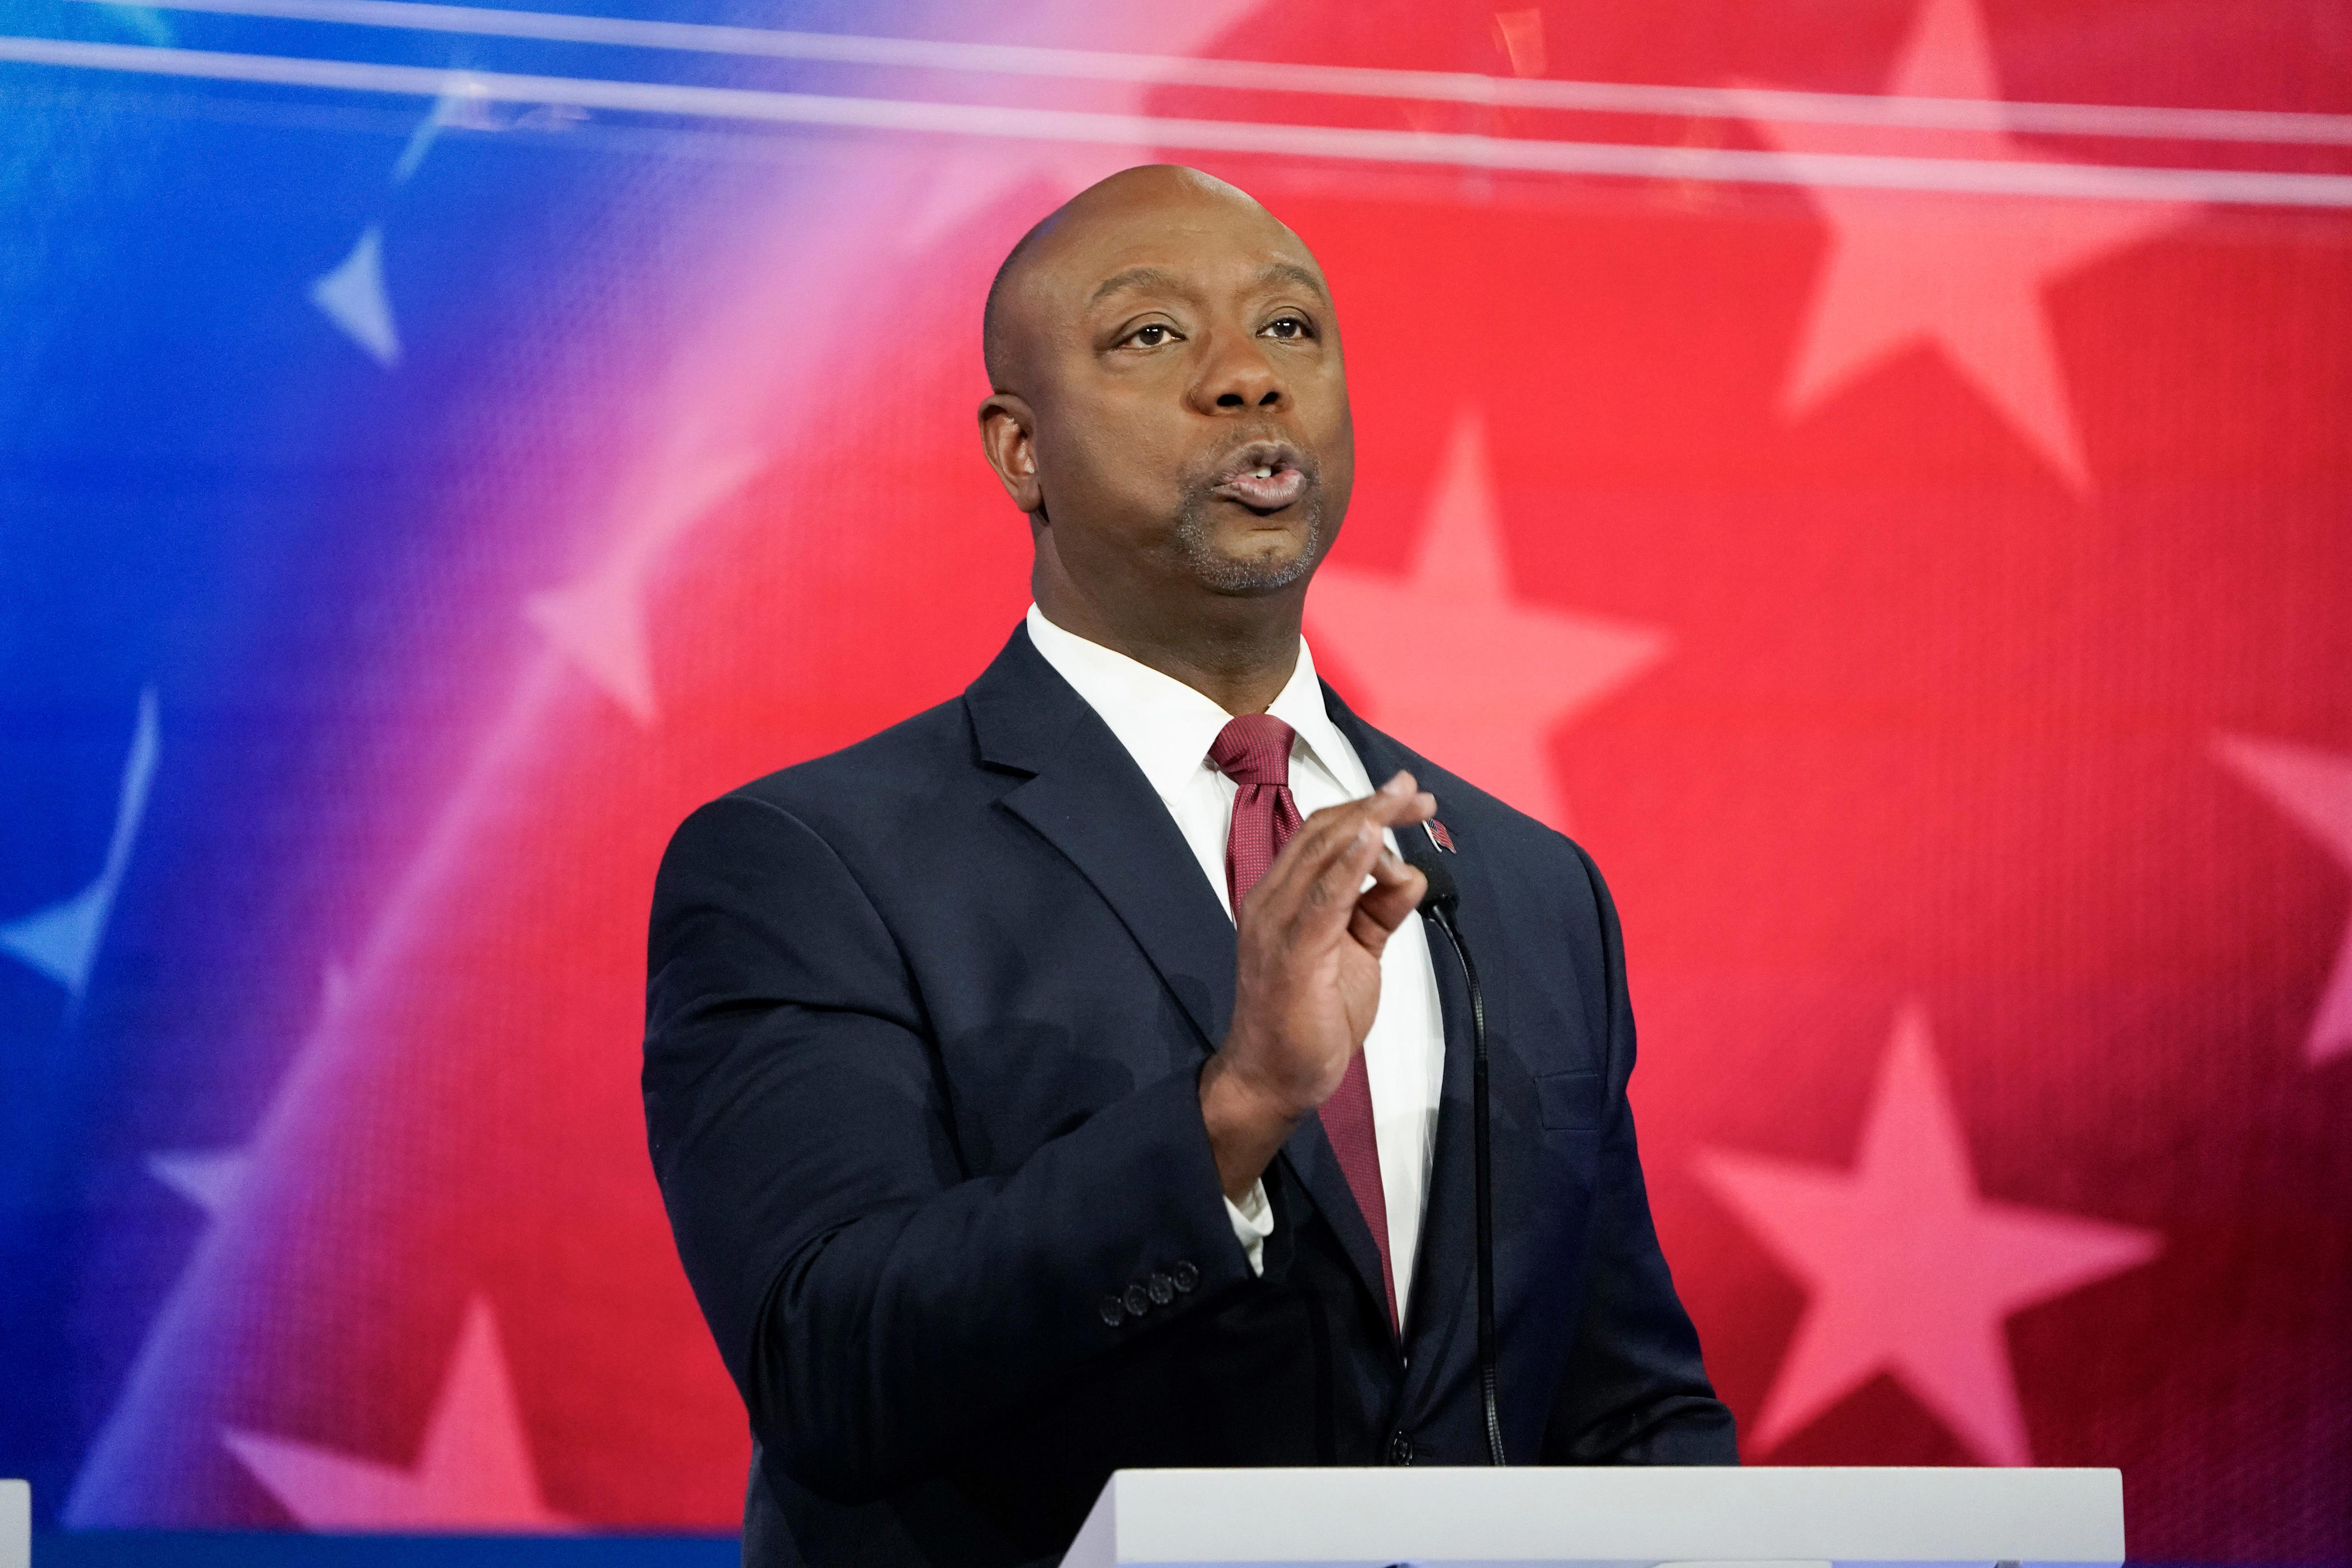 tim scott, donald trump's potential running mate, doesn't commit to accepting 2024 election outcome